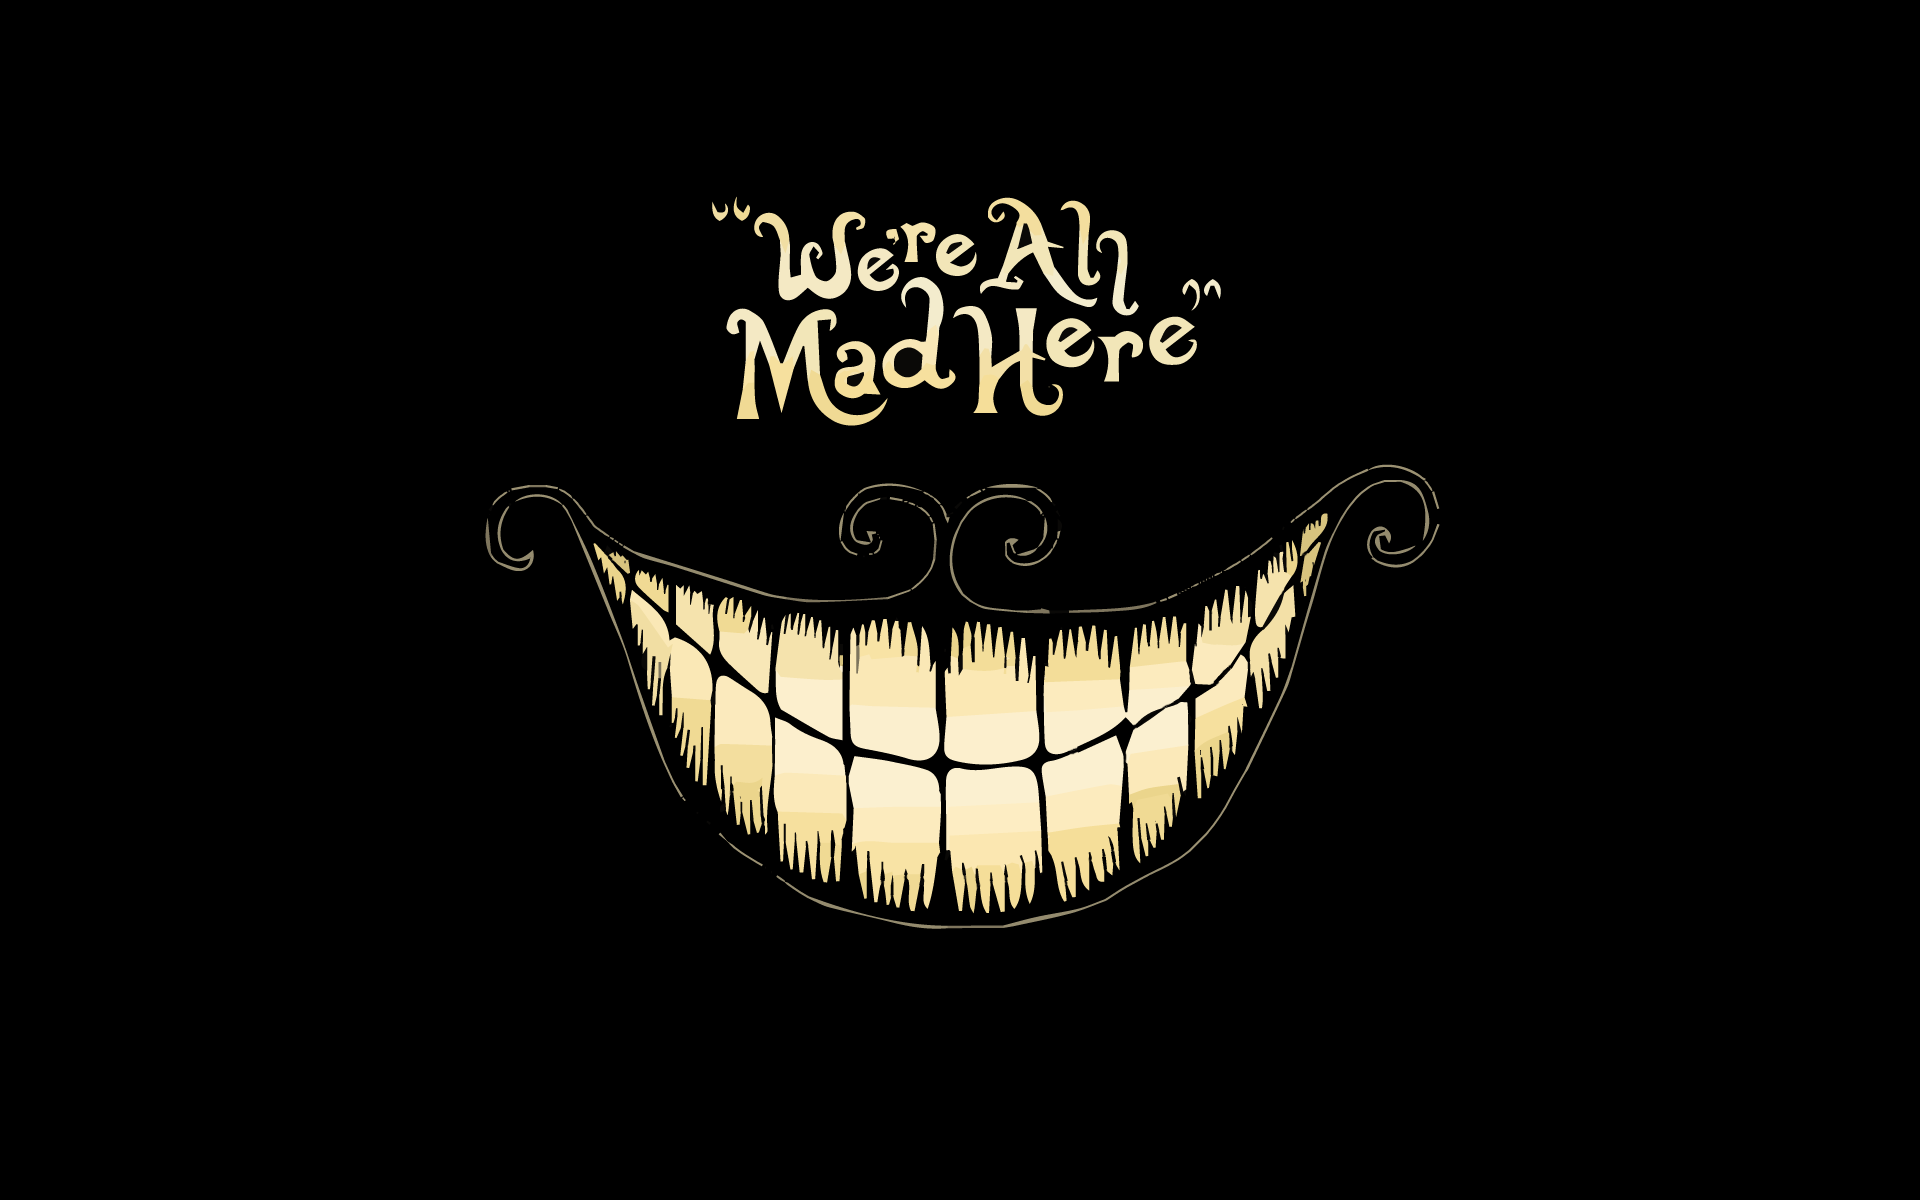 cheshire cat wallpaper,font,text,mouth,logo,smile